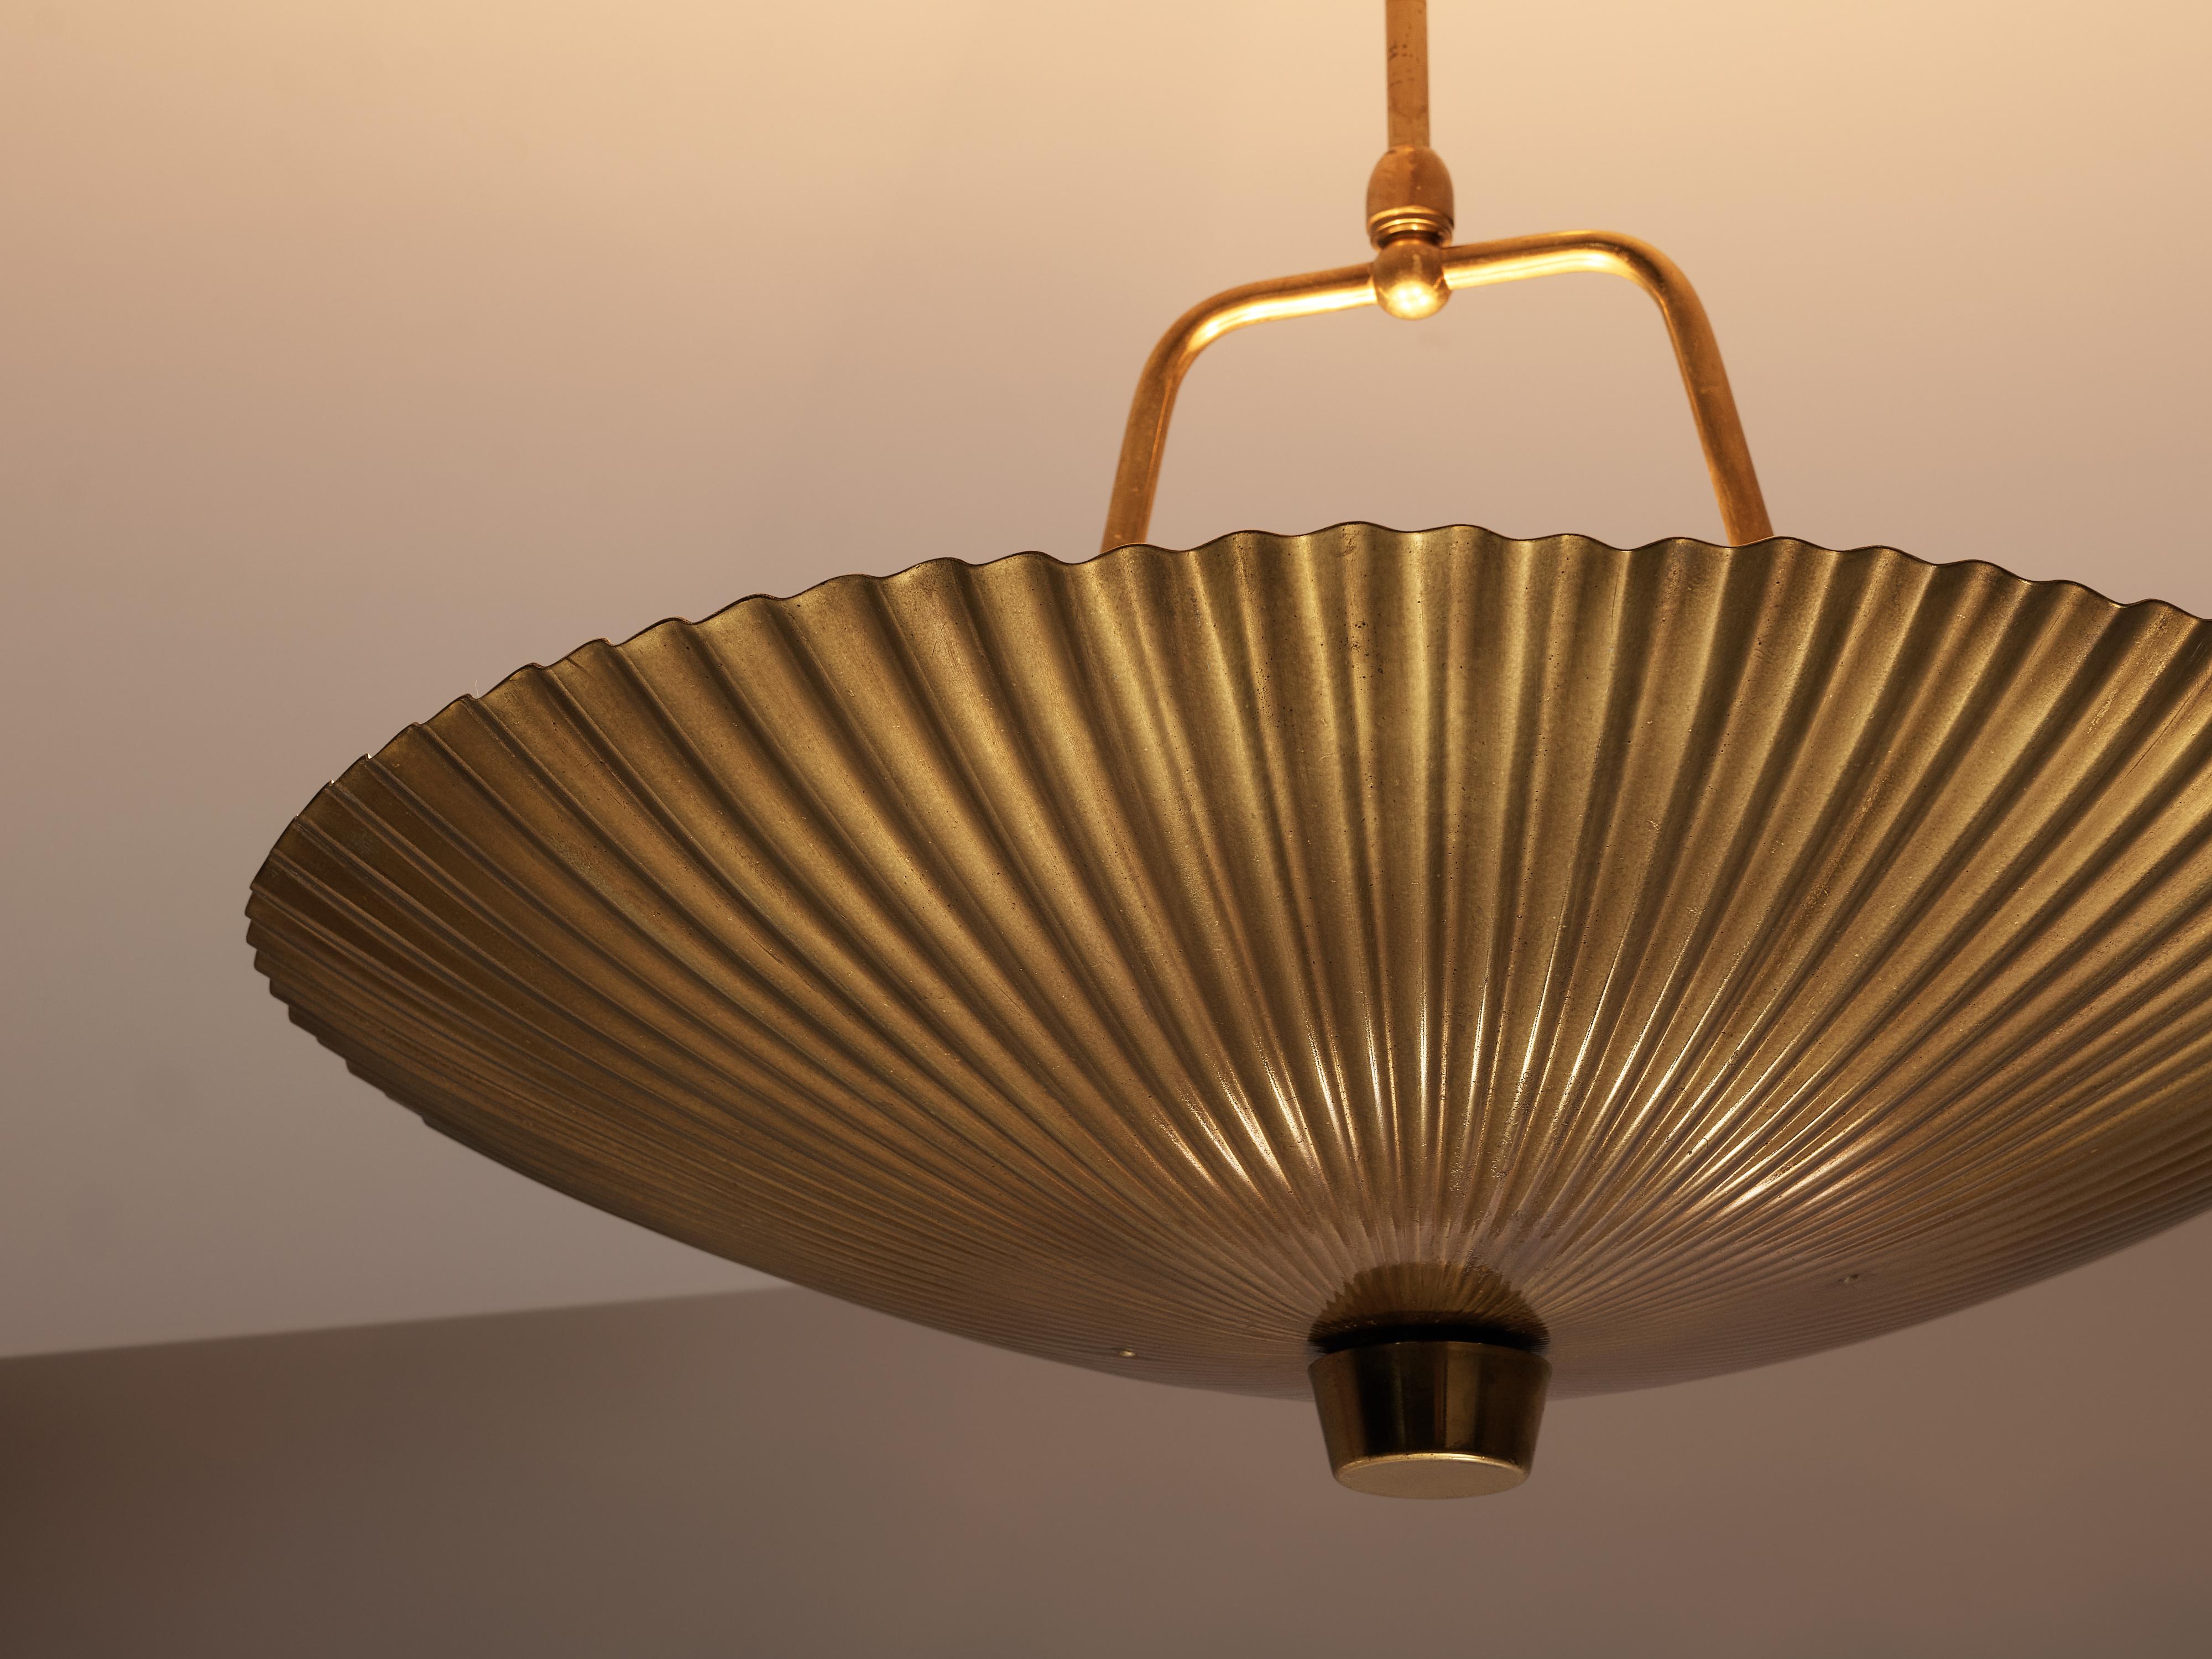 Paavo Tynell for Idman, rare pendant lamp, brass, Finland, 1960s

Exclusive chandelier by Finnish lamp designer Paavo Tynell for Idman. The wavy texture of the shade was used by Tynell for chandeliers and also for a table lamp. Yet, this way of